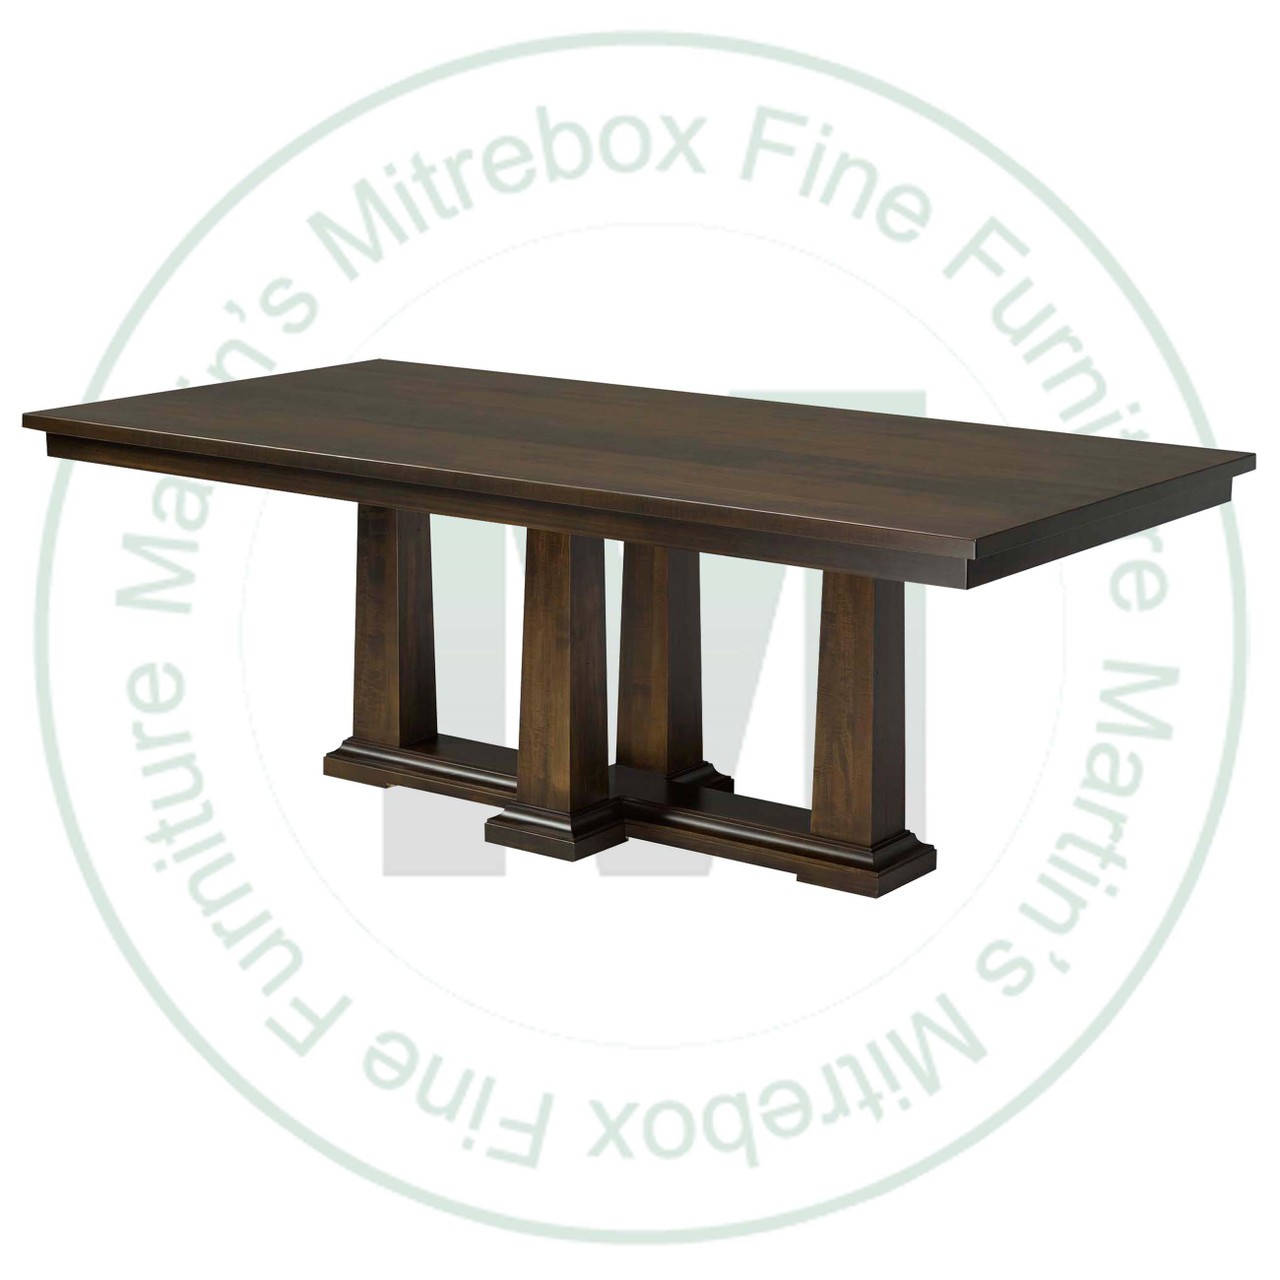 Maple Parthenon Double Pedestal Table 54''D x 84''W x 30''H Solid Top Table Has 1.25'' Thick Top